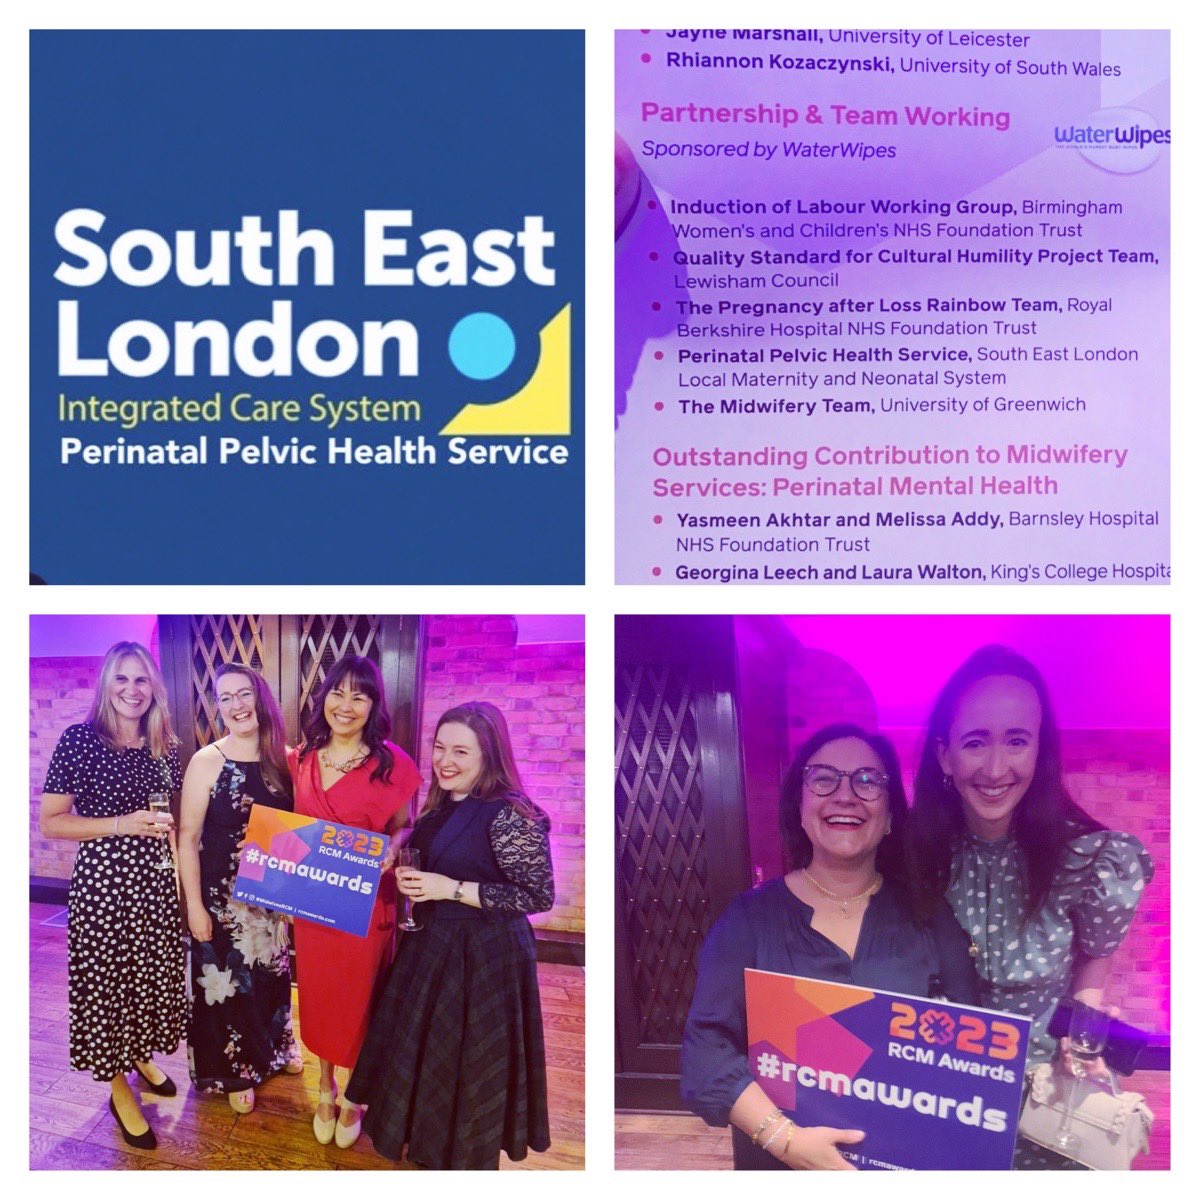 At the #rcmawards! We were nominated for Partnership & Team Working! Fingers crossed! @MidwivesRCM @GSTTnhs @SELondonICS @jacquikempen